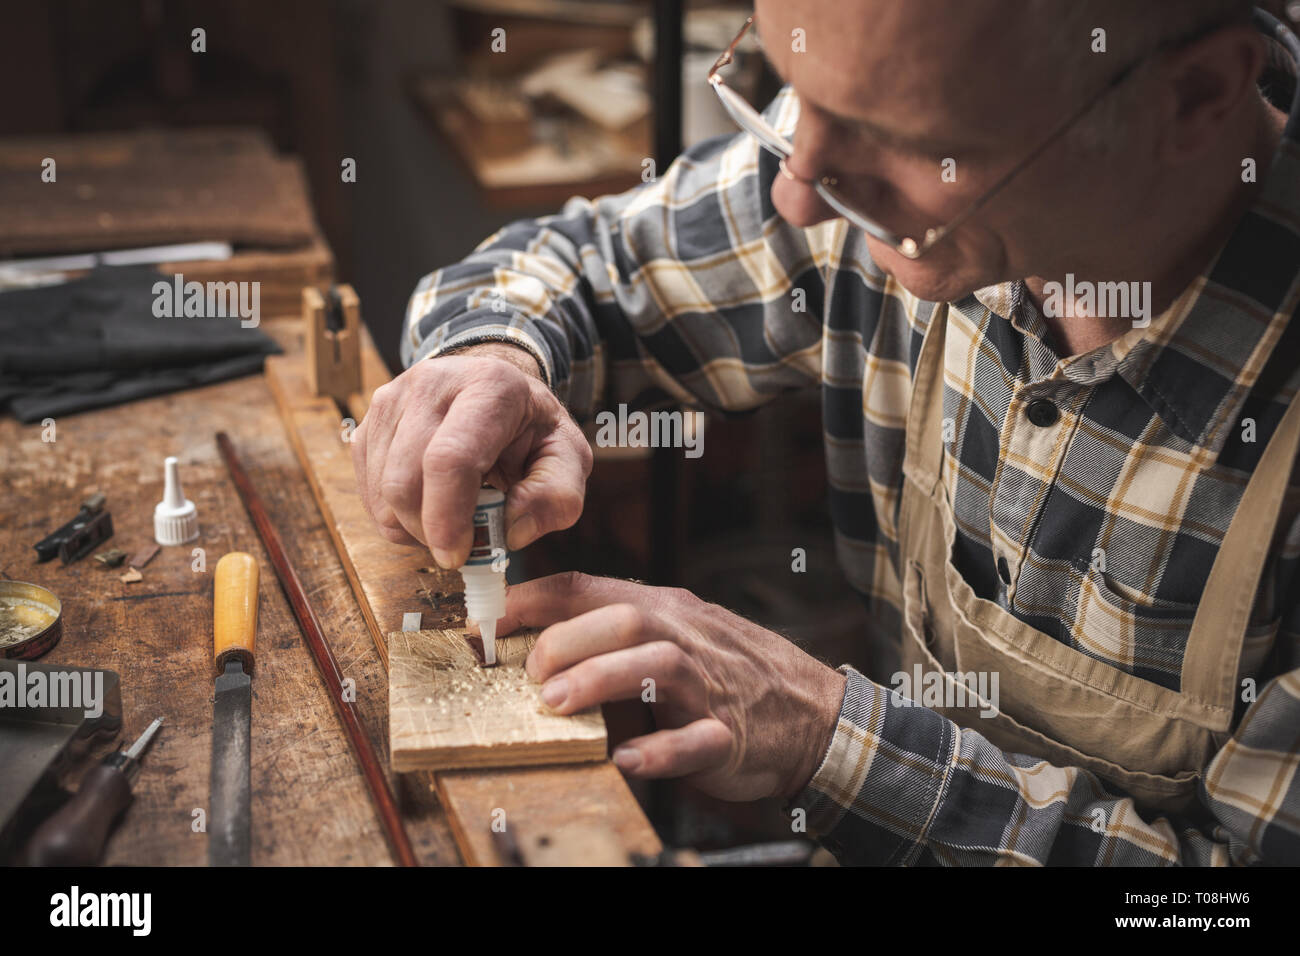 Mature artisan sitting at a rustic workbench while carefully applying glue on a small item Stock Photo